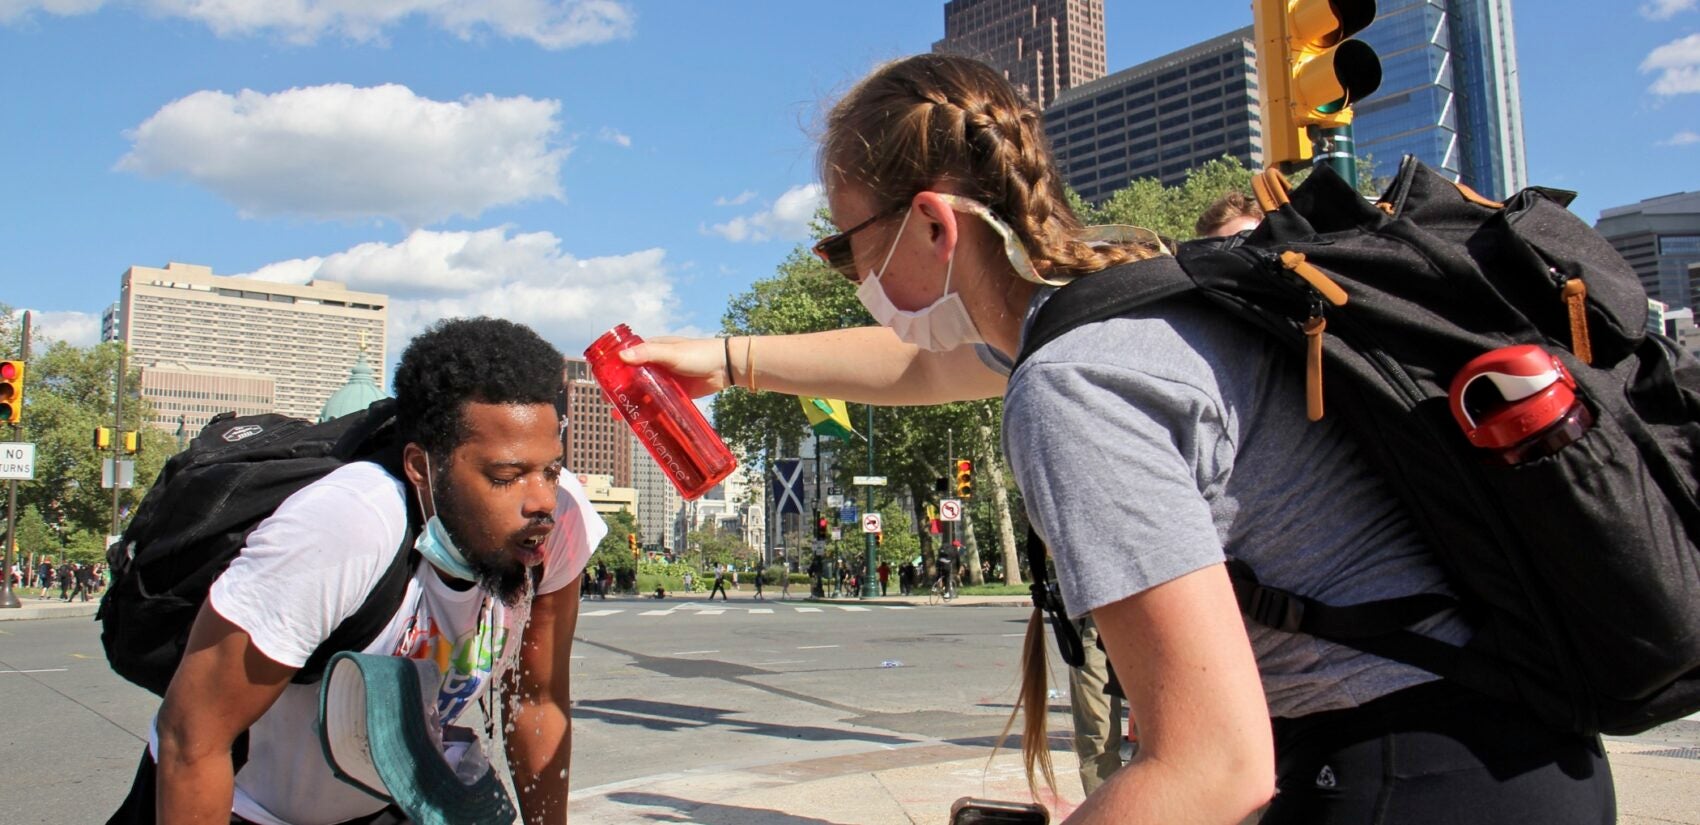 Protesters help each other after being tear gassed on the Ben Franklin Parkway, June 1, 2020. (Emma Lee/WHYY)